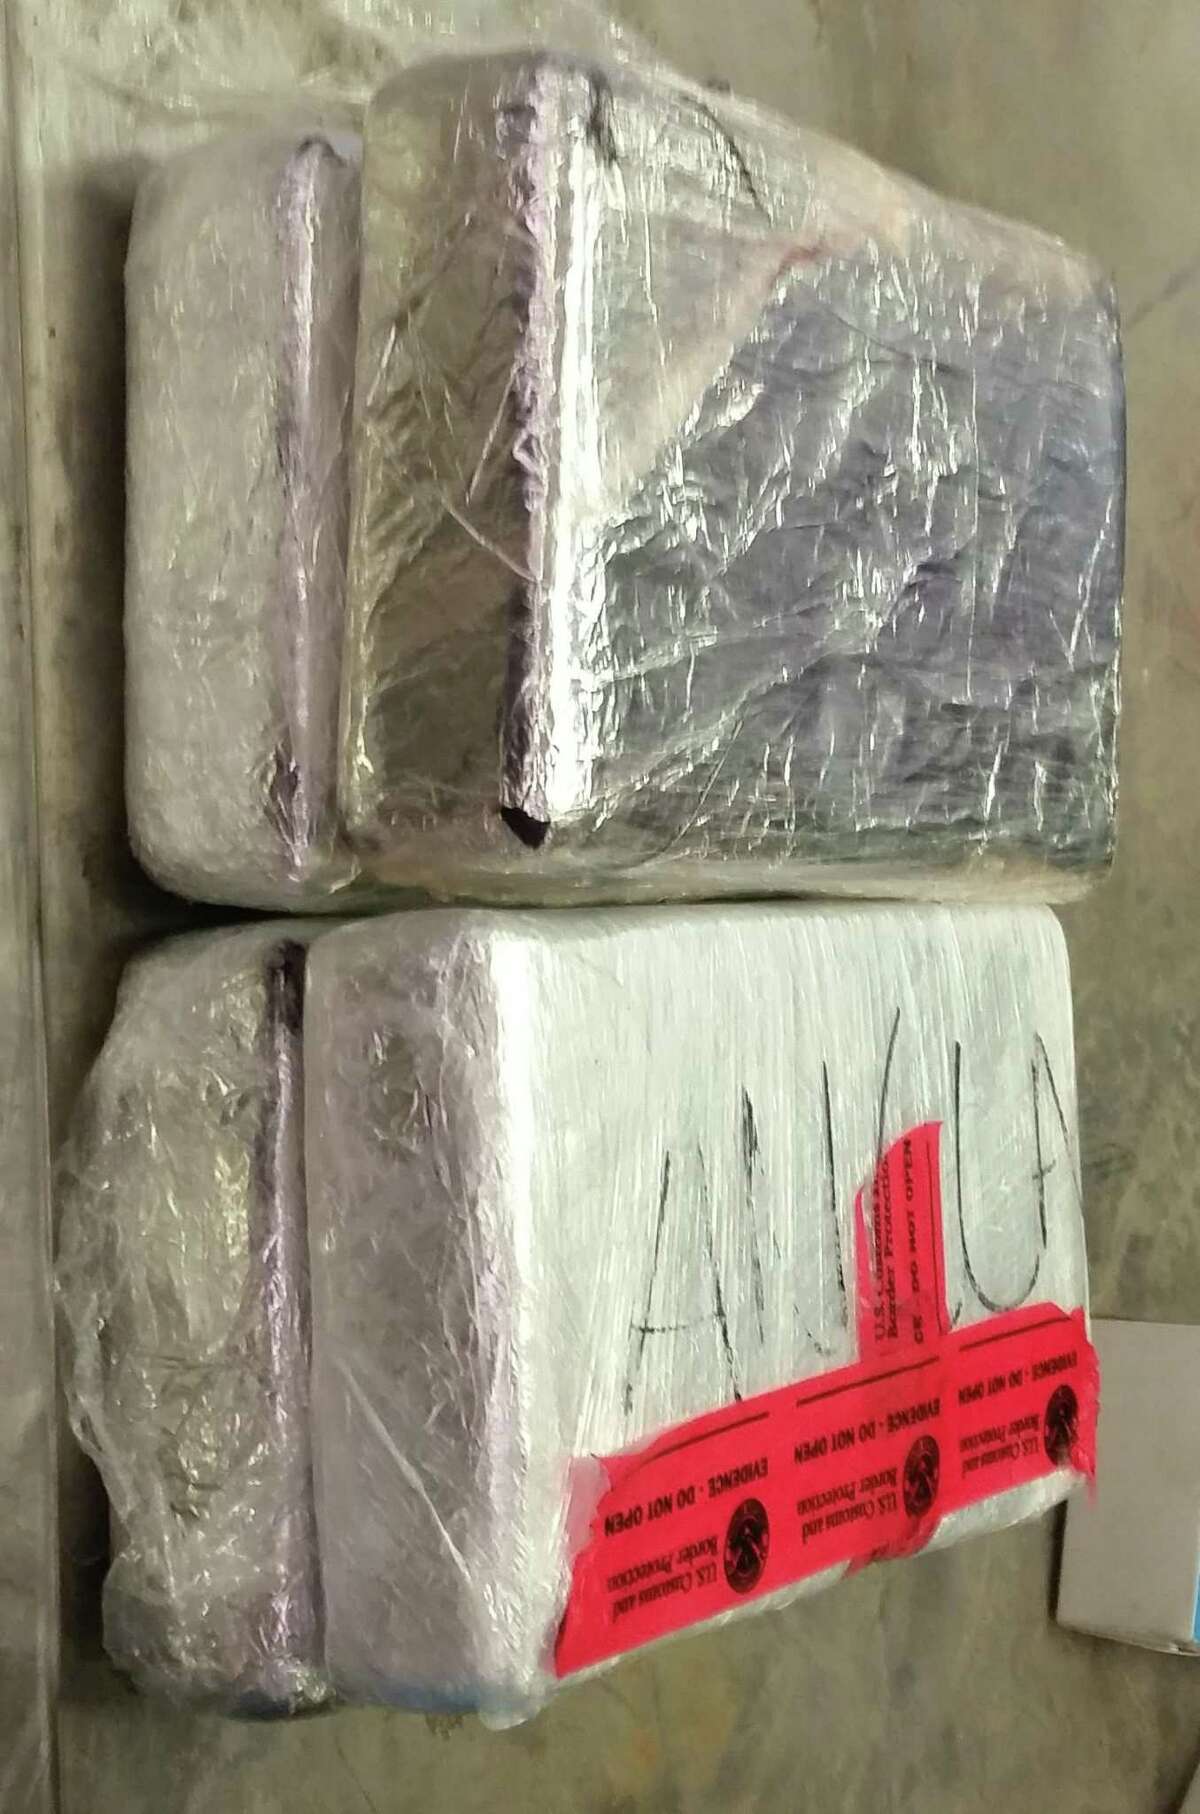 Pictured is the cocaine recently seized by CBP. A SENTRI program participant was carrying four packages of cocaine in the vehicle he was driving. Officers discovered the narcotics upon further inspection.